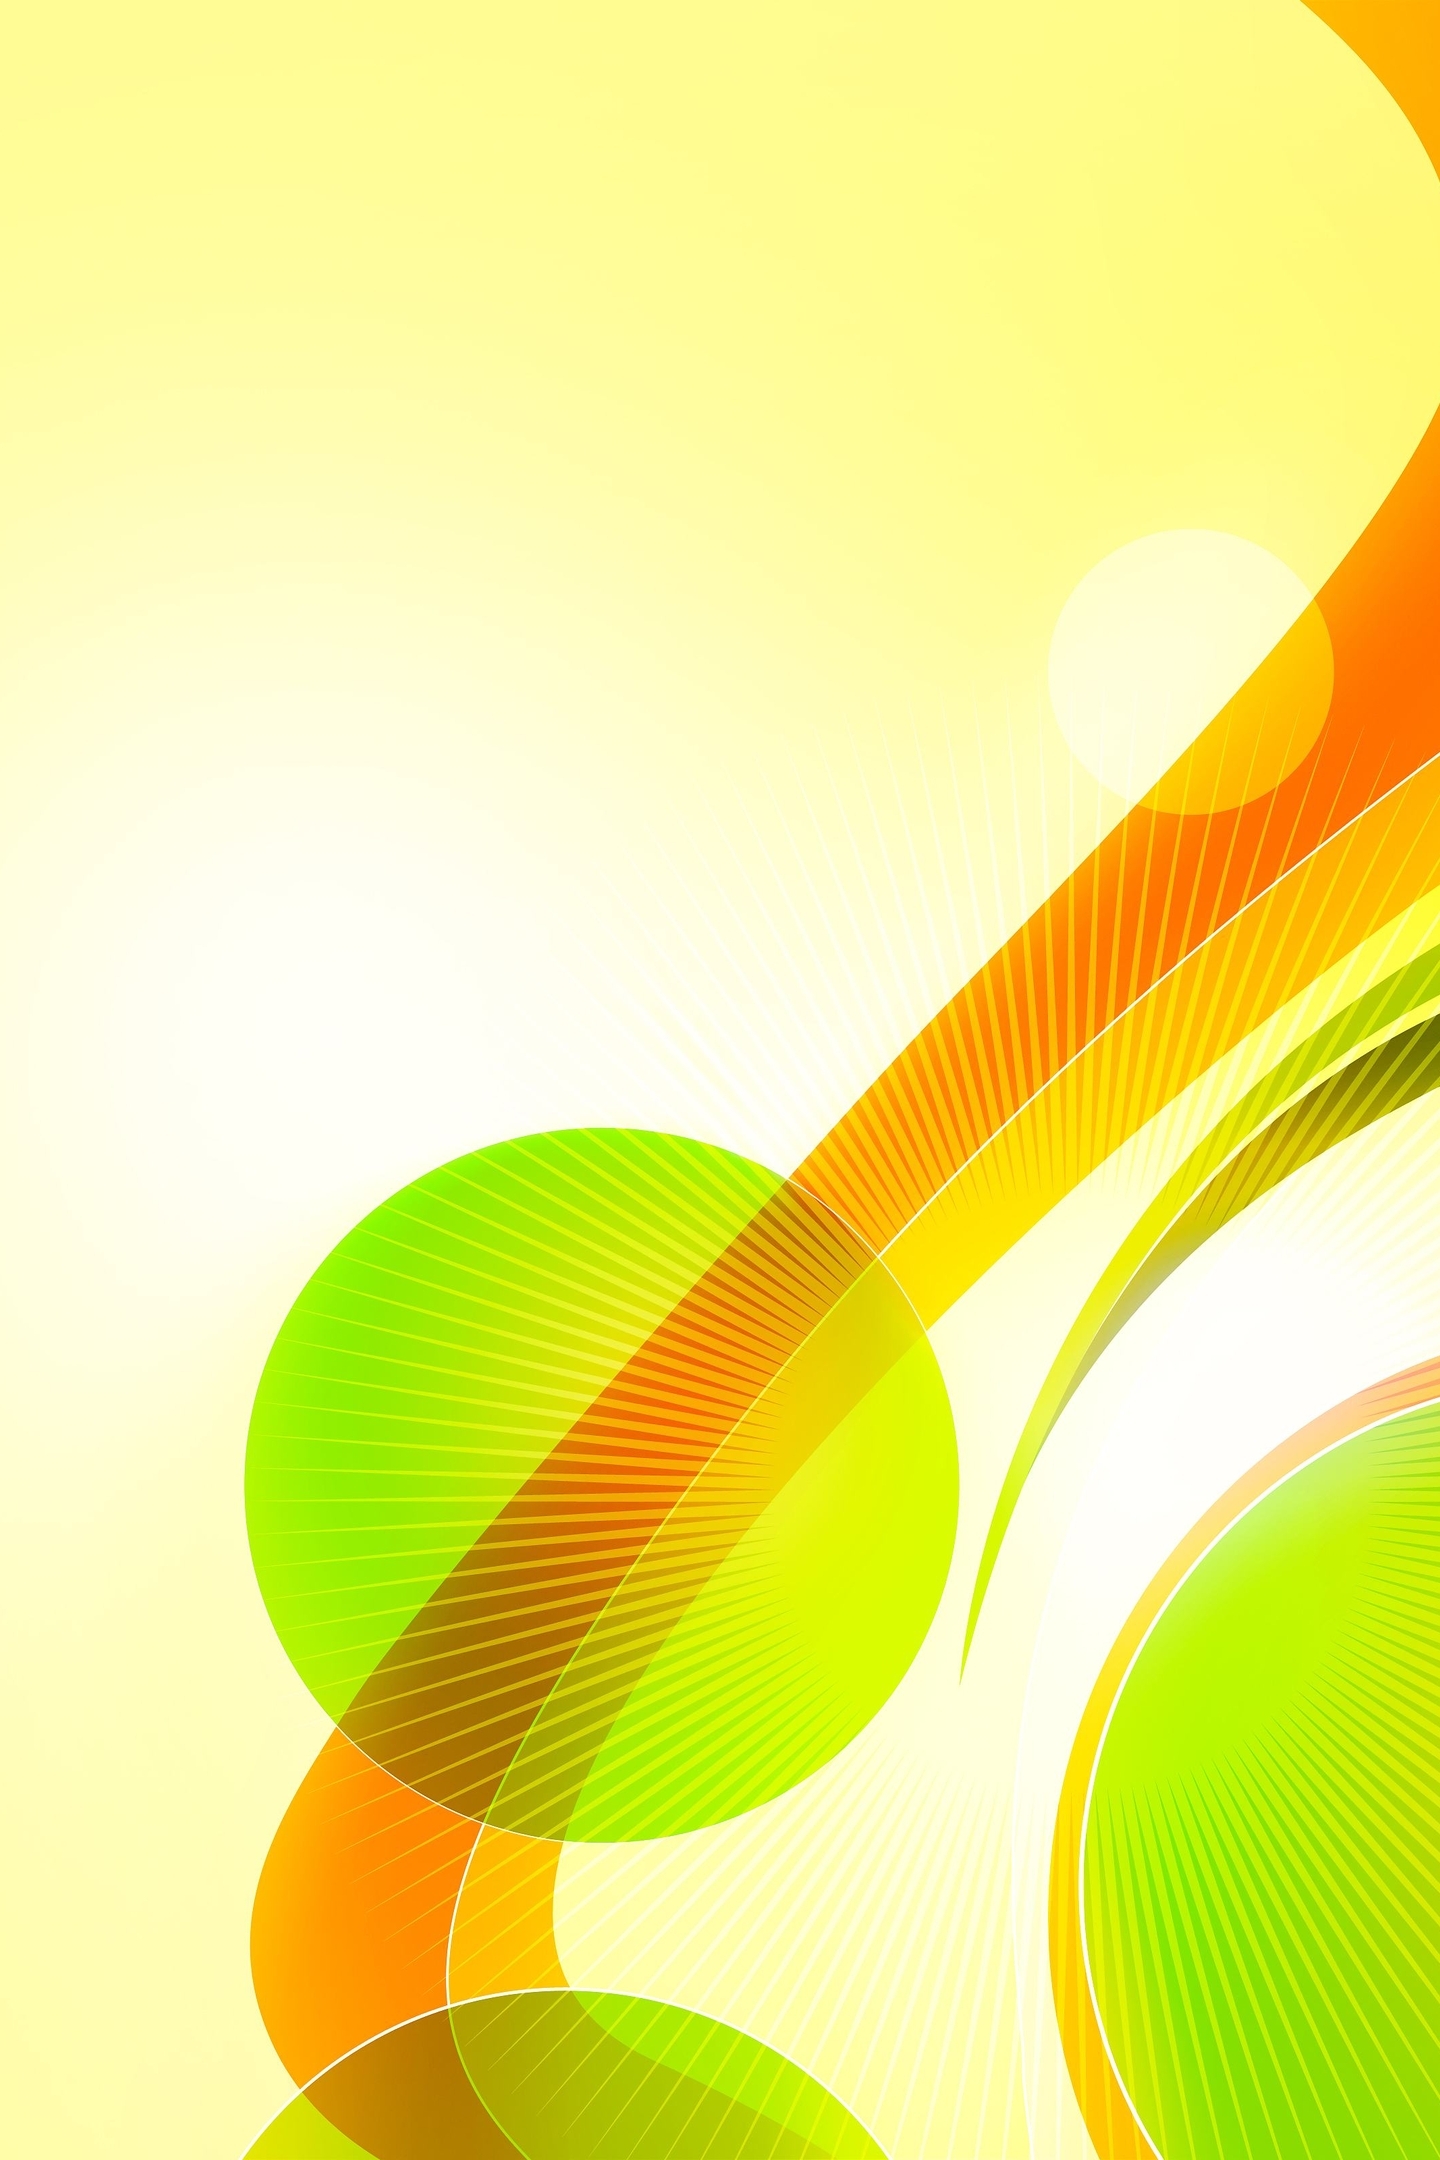 Image: Circles, yellow, green, lines, rays